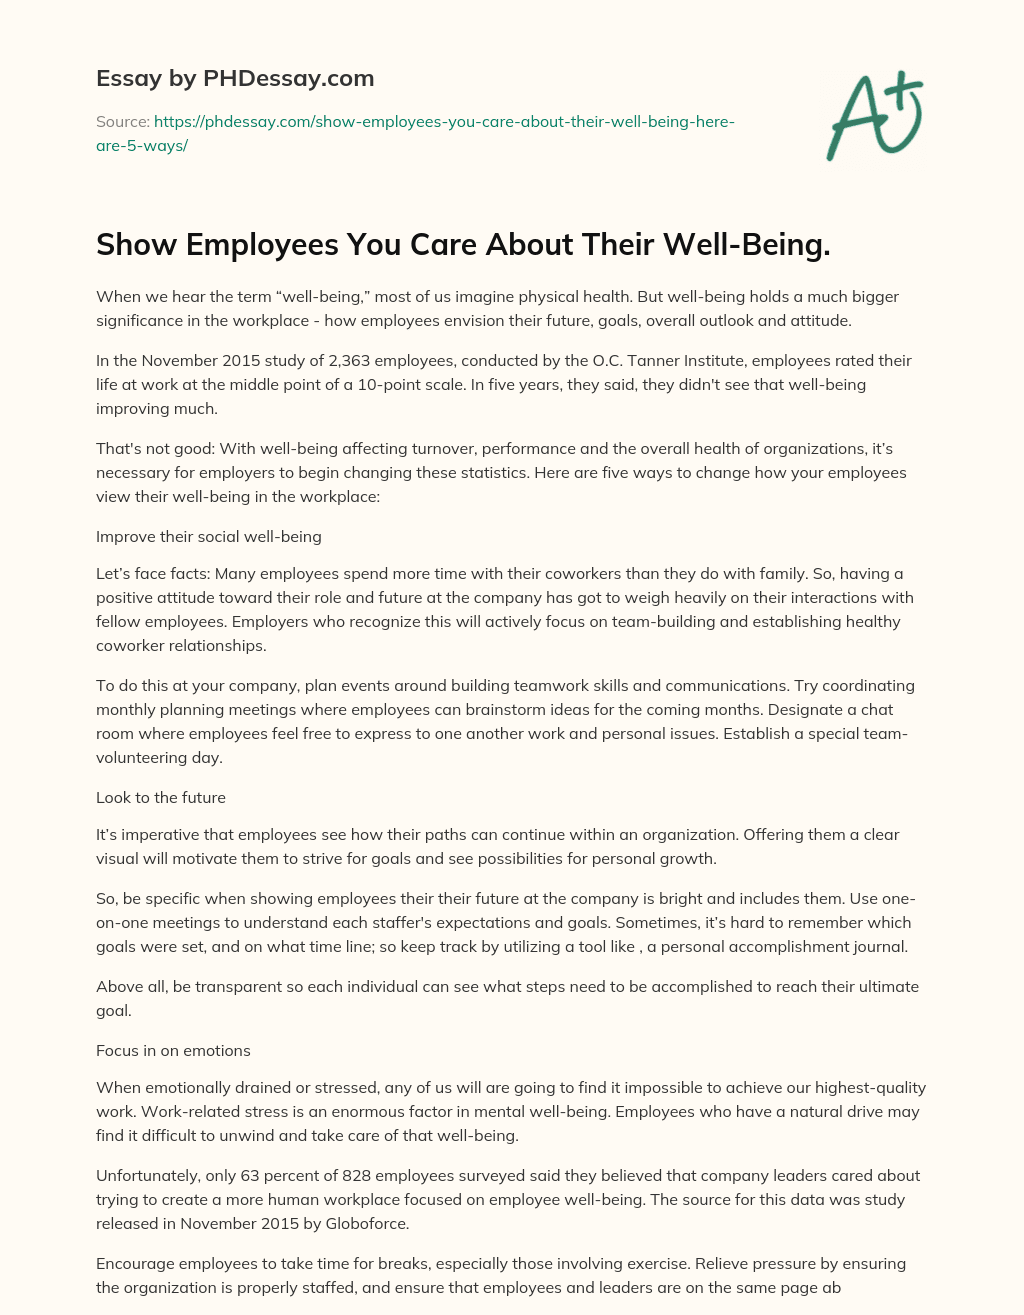 Show Employees You Care About Their Well-Being. essay